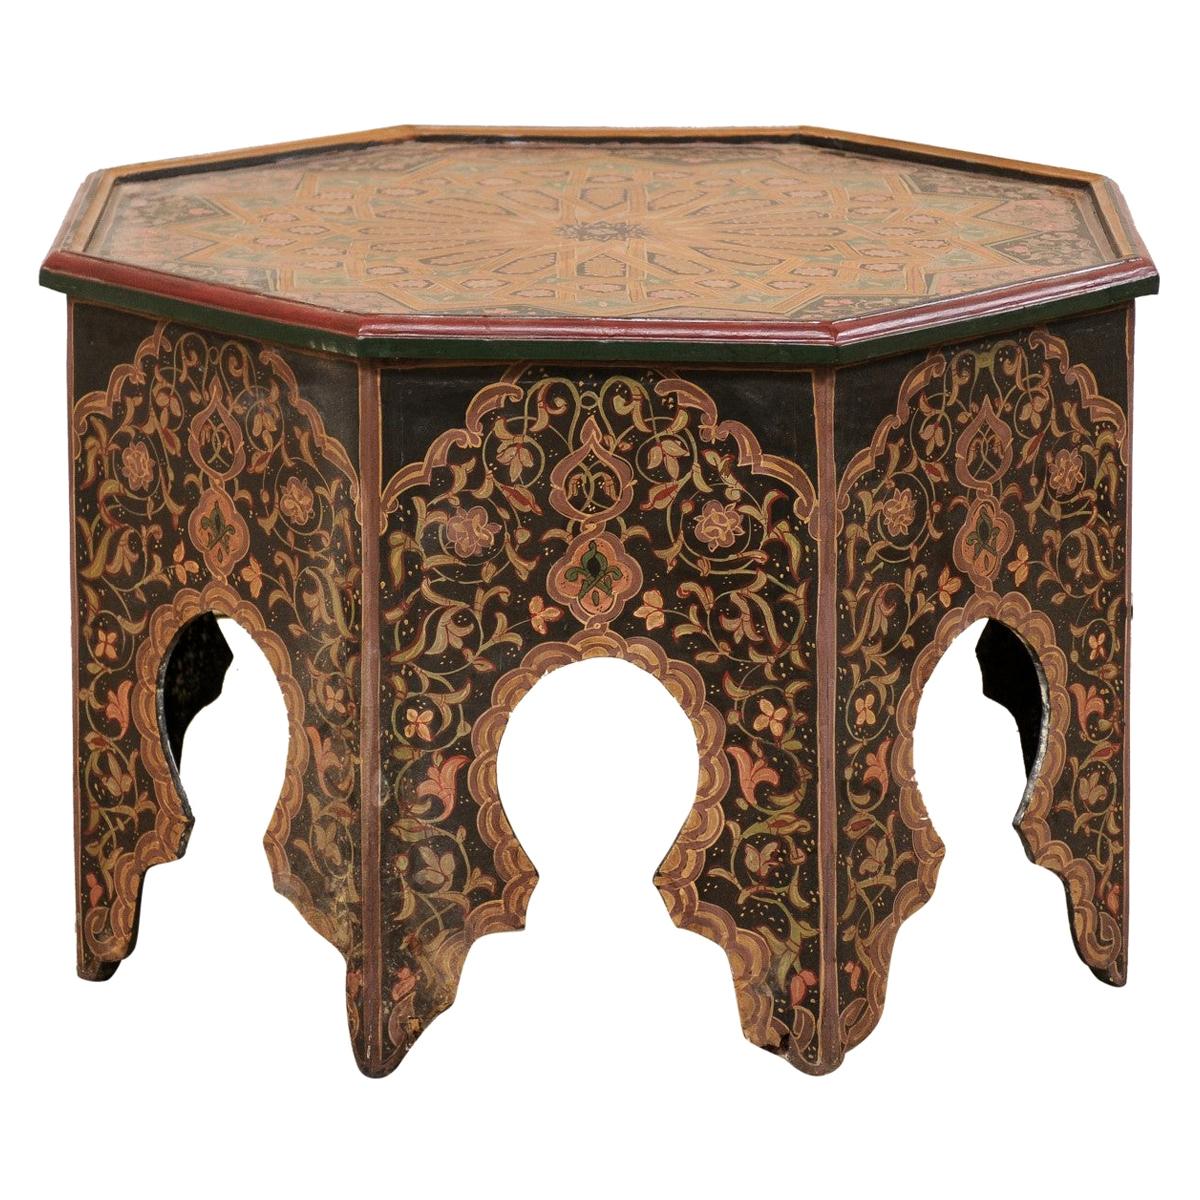 Moroccan Coffee or Tea Table Adorn with Intricate Floral and Geometric Paintings